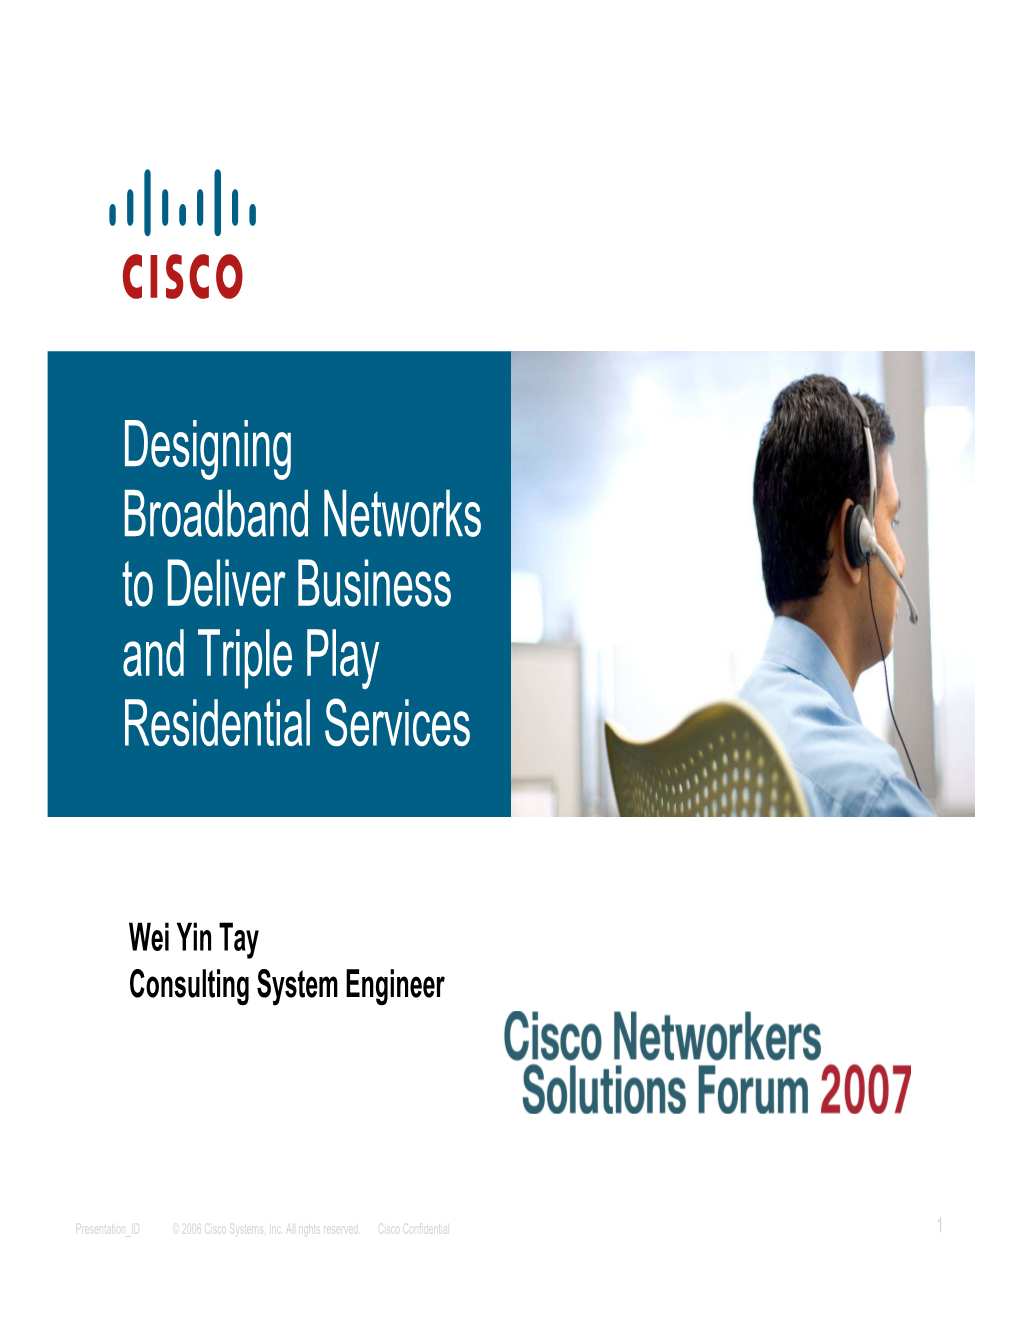 Designing Broadband Networks to Deliver Business and Triple Play Residential Services